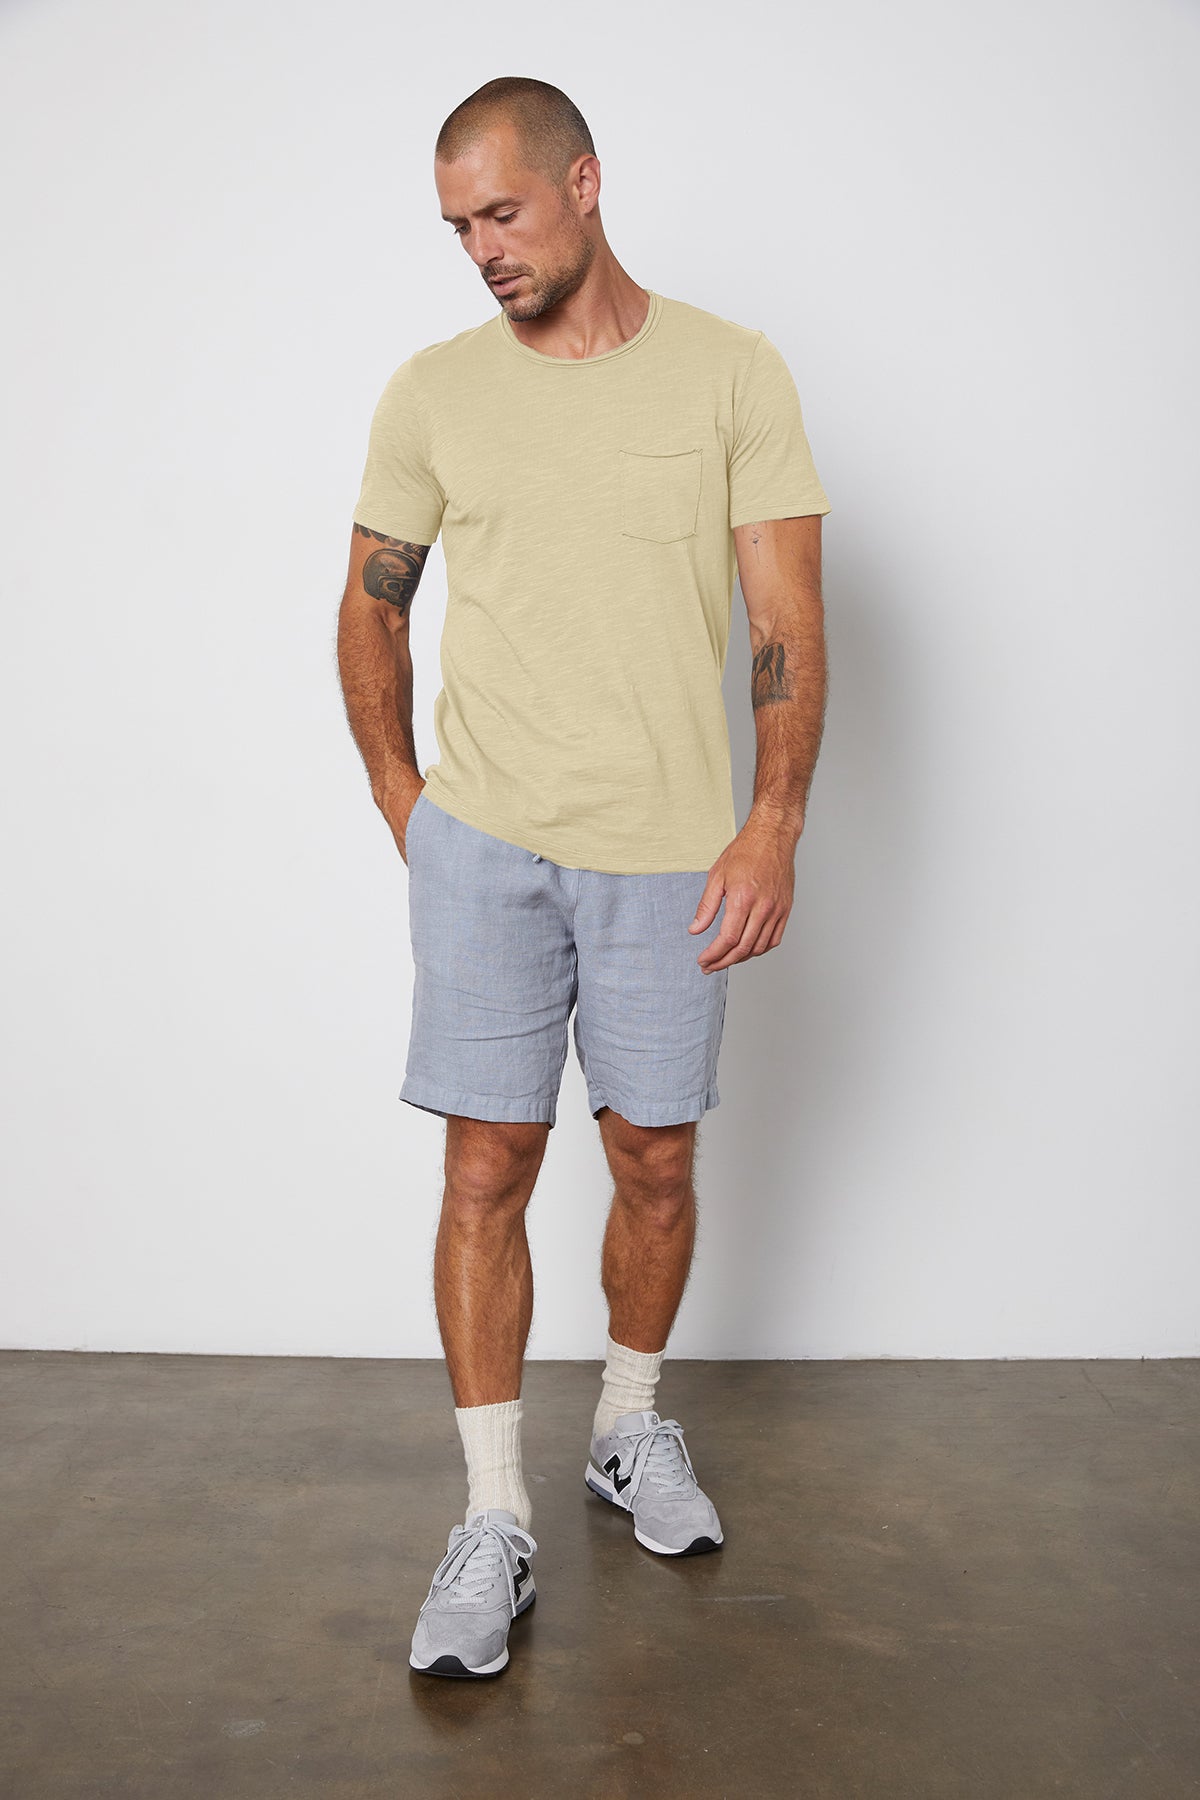 Chad Raw Edge Cotton Slub Pocket Tee in Olivine with Jonathan shorts in chambray front-25328431300801